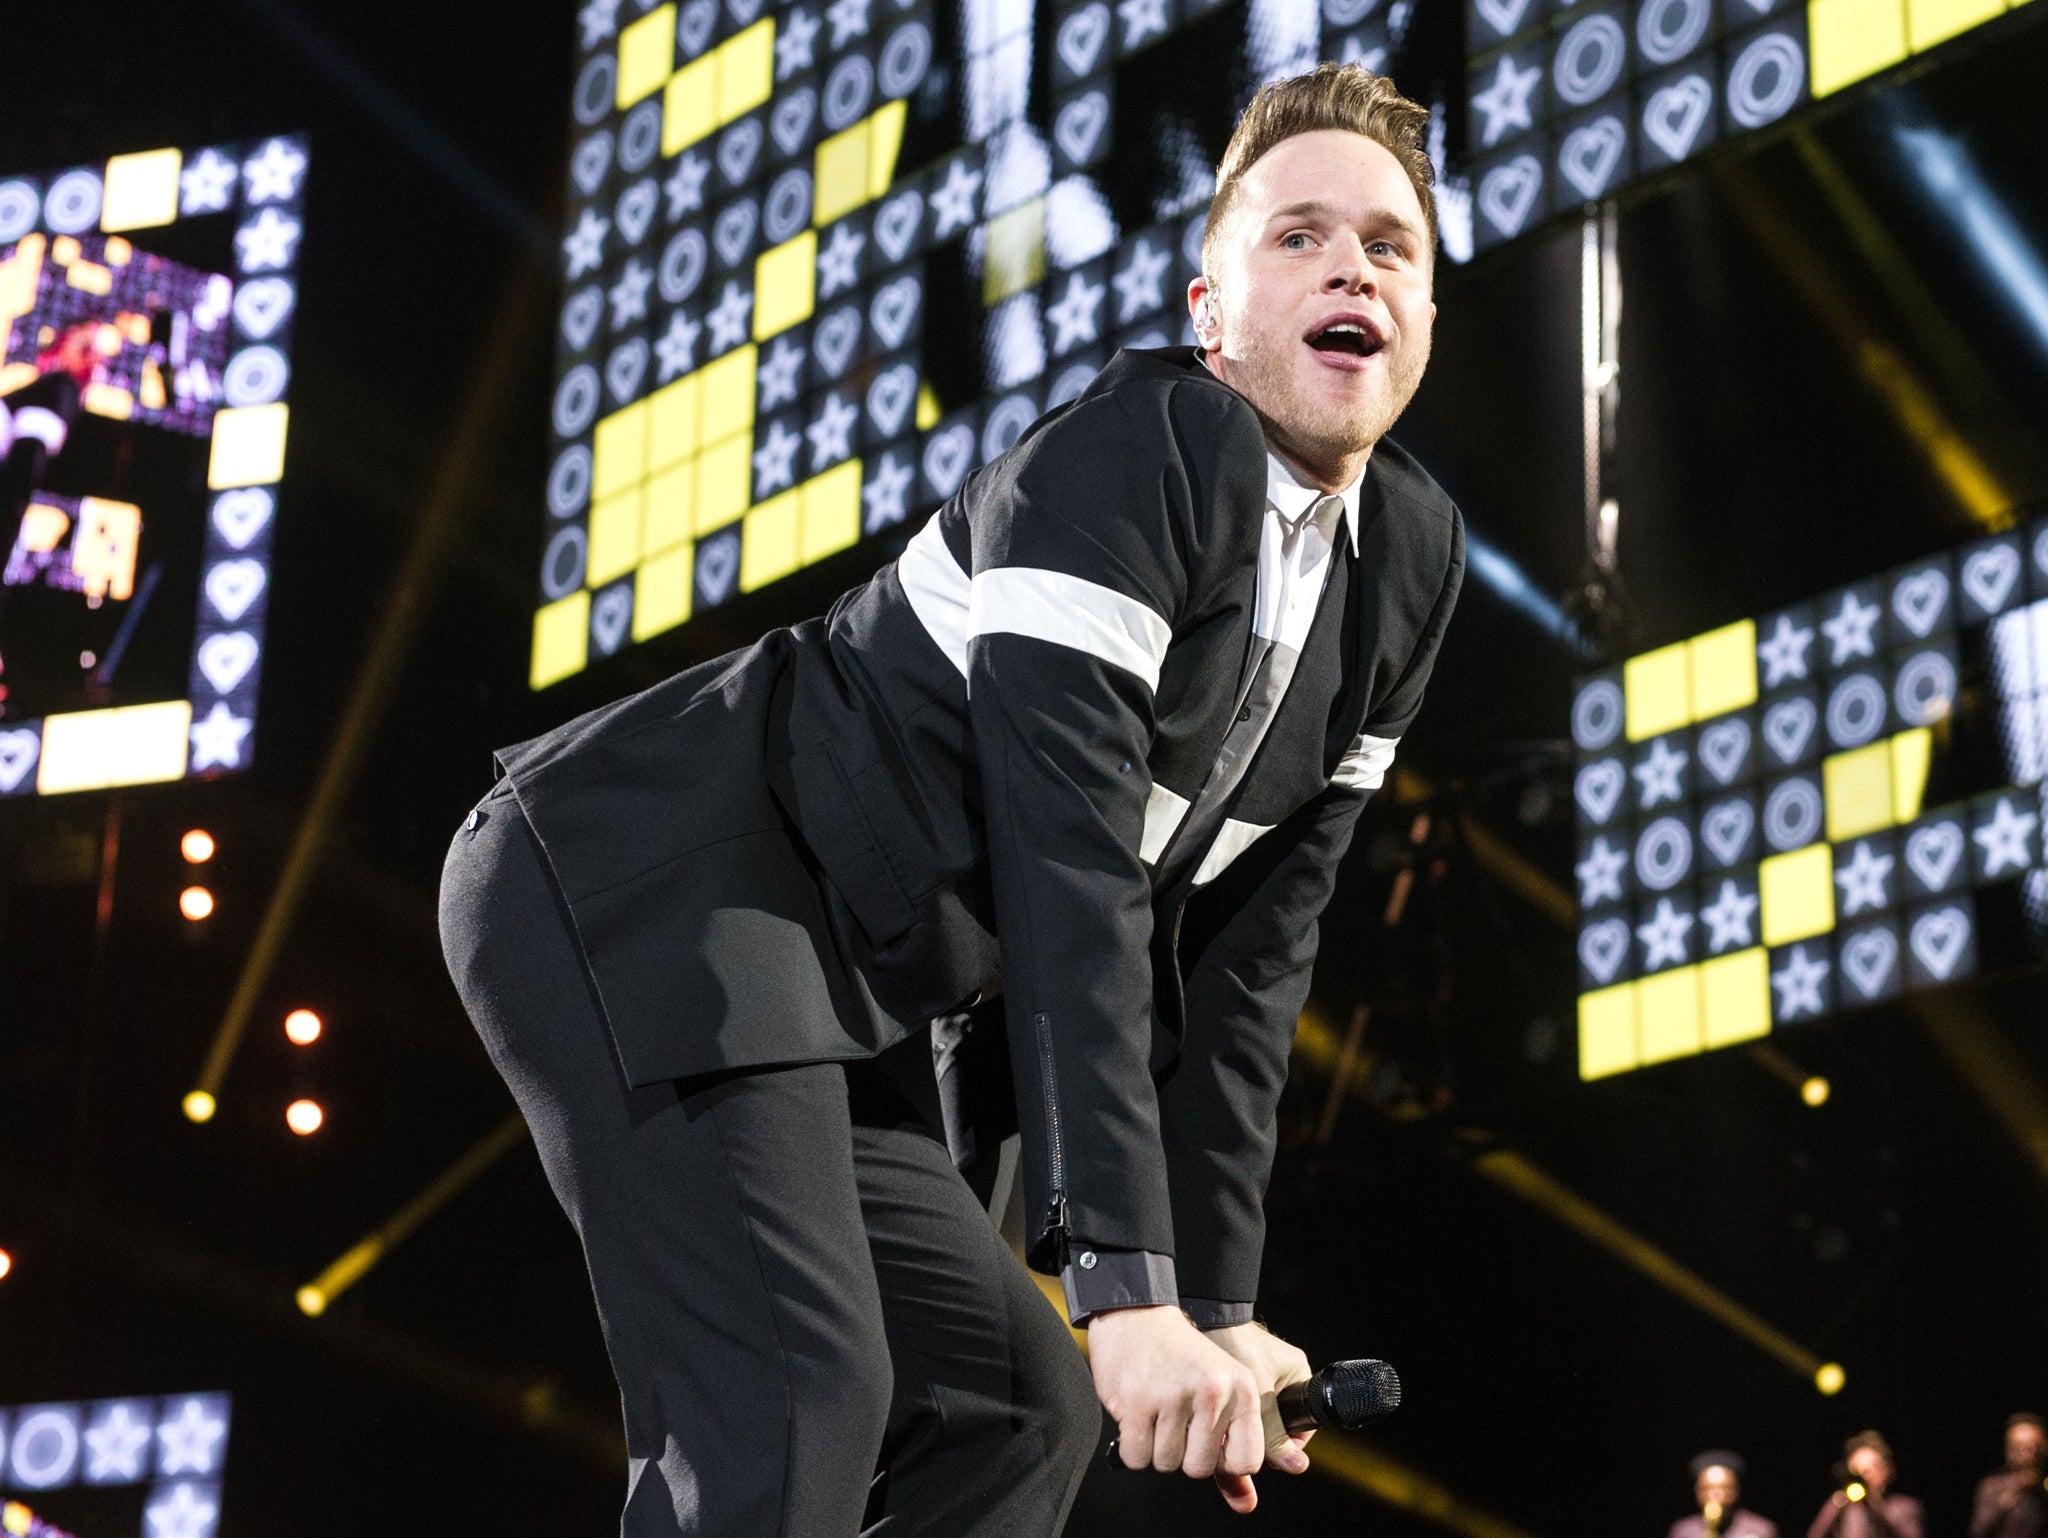 Olly Murs performs at London's O2 on his fourth UK tour in five years